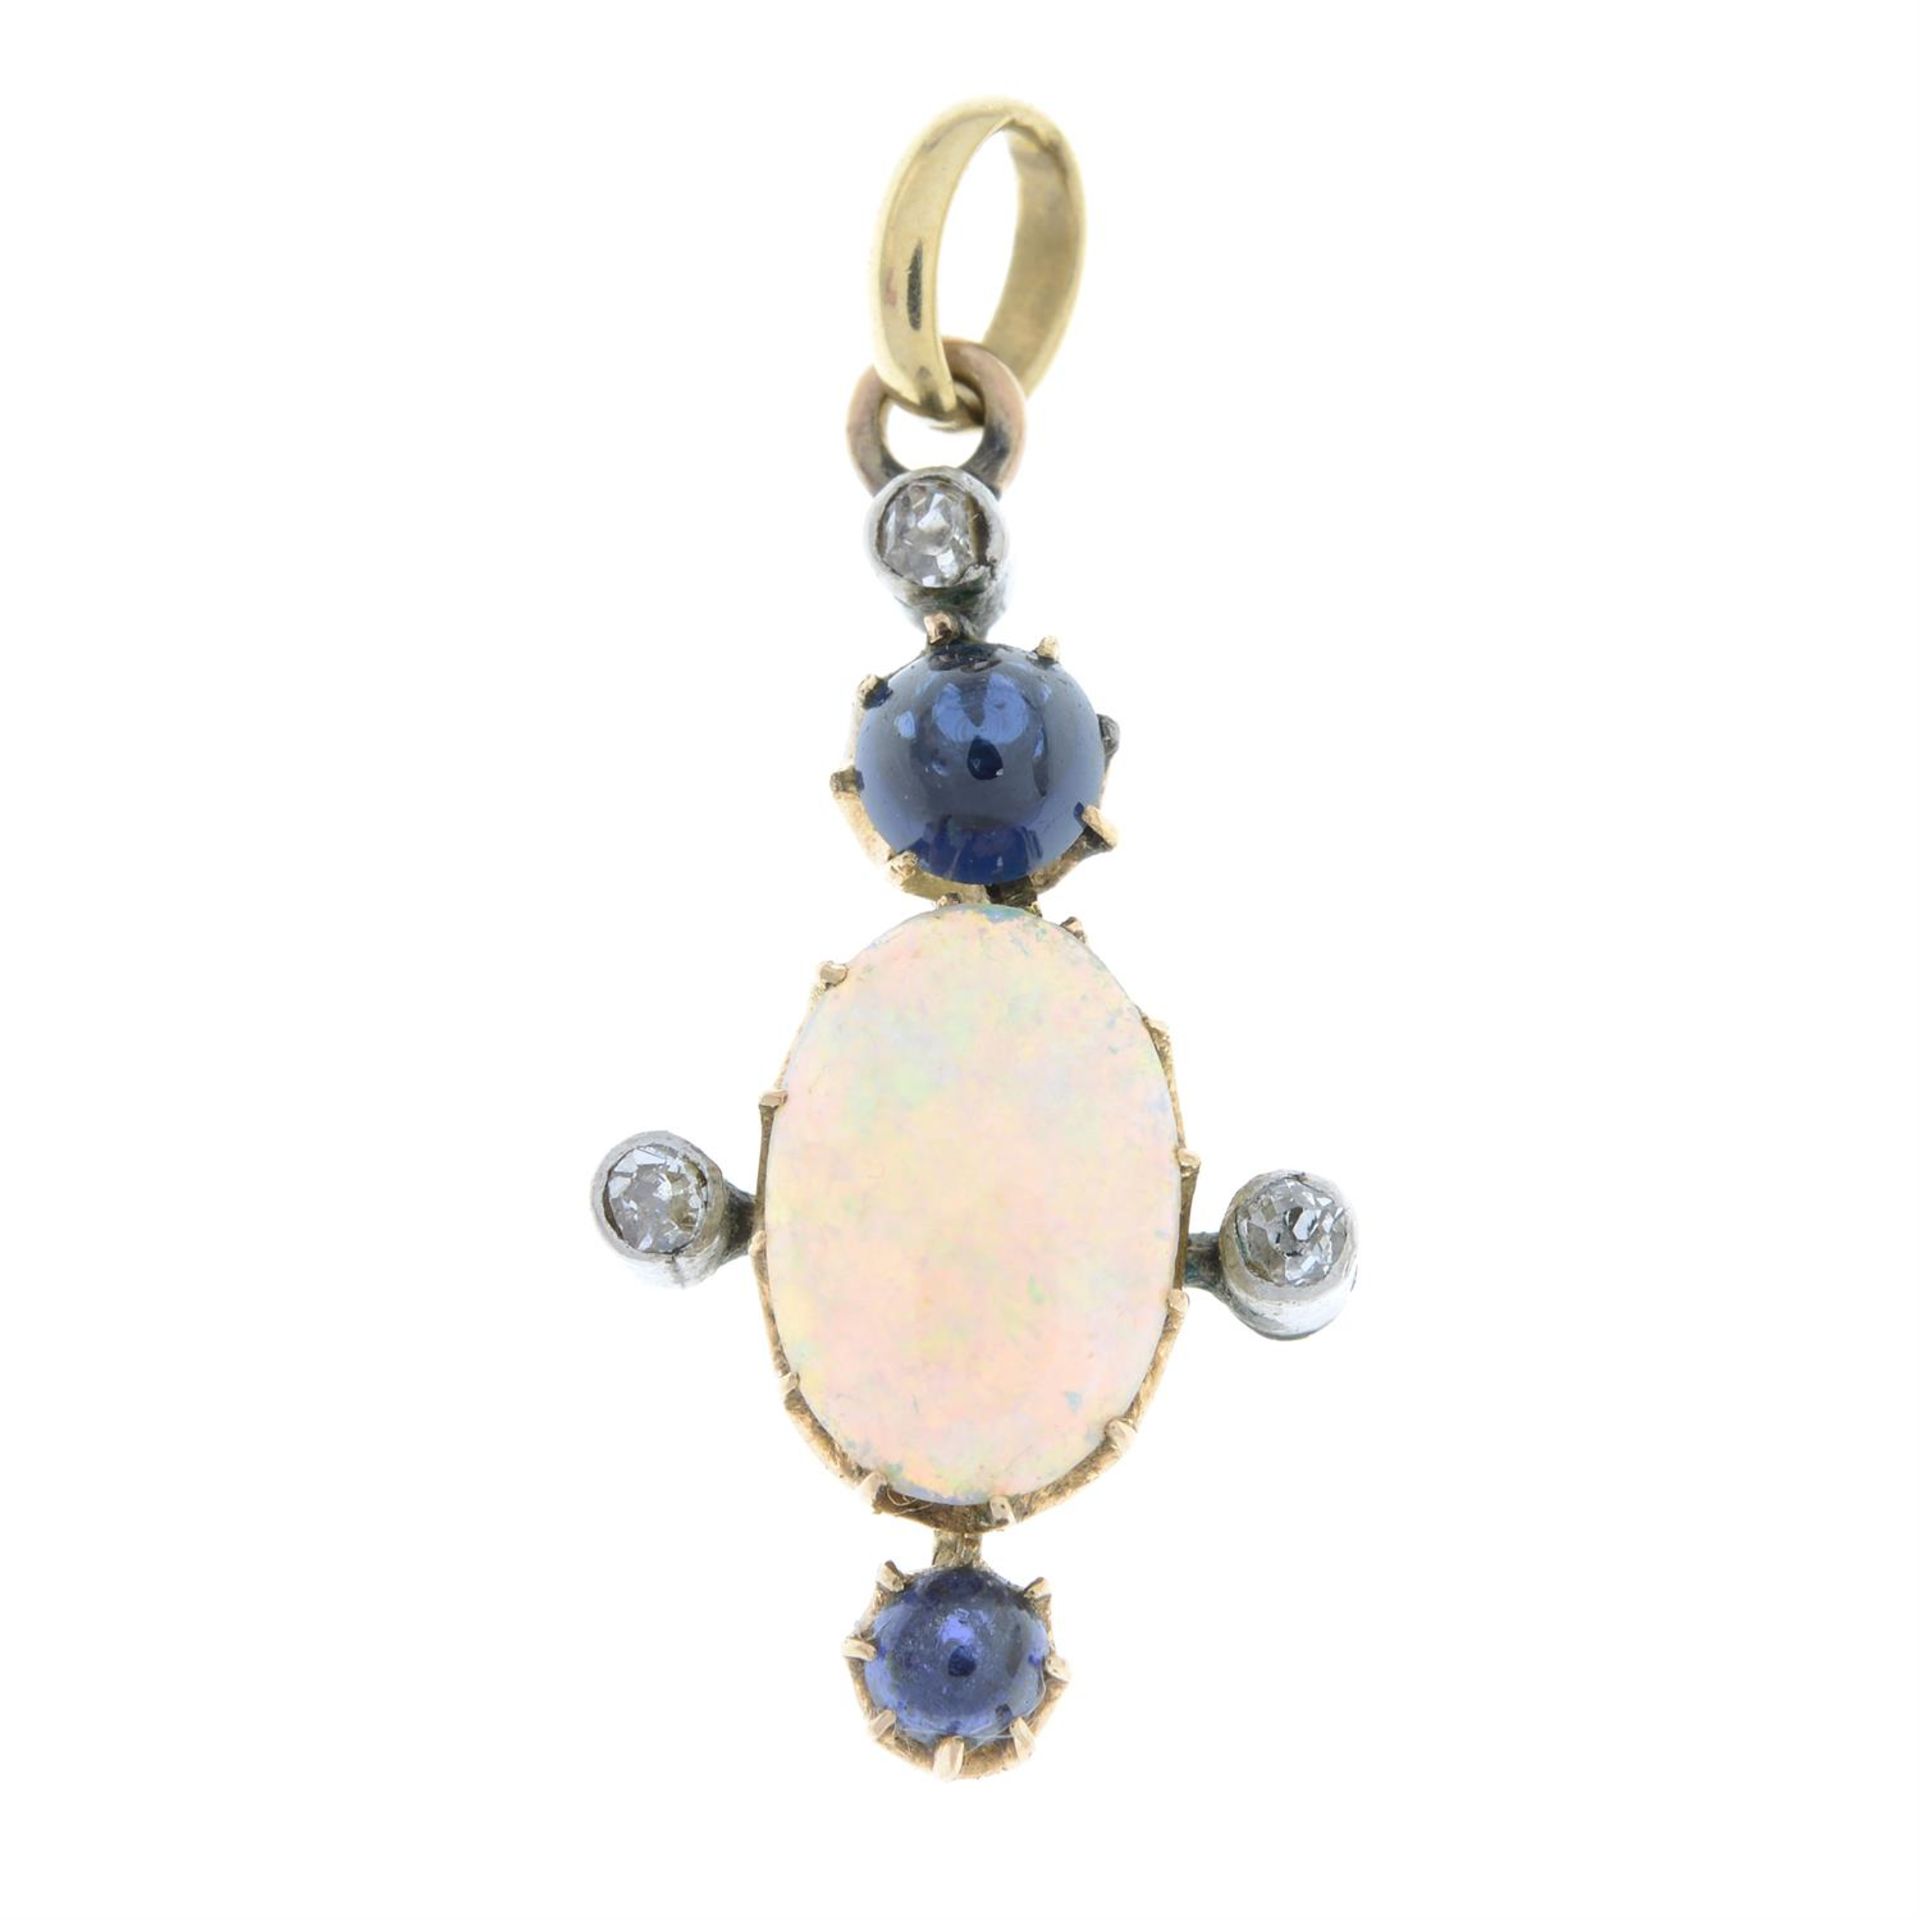 An early 20th century gold opal, diamond and sapphire pendant.